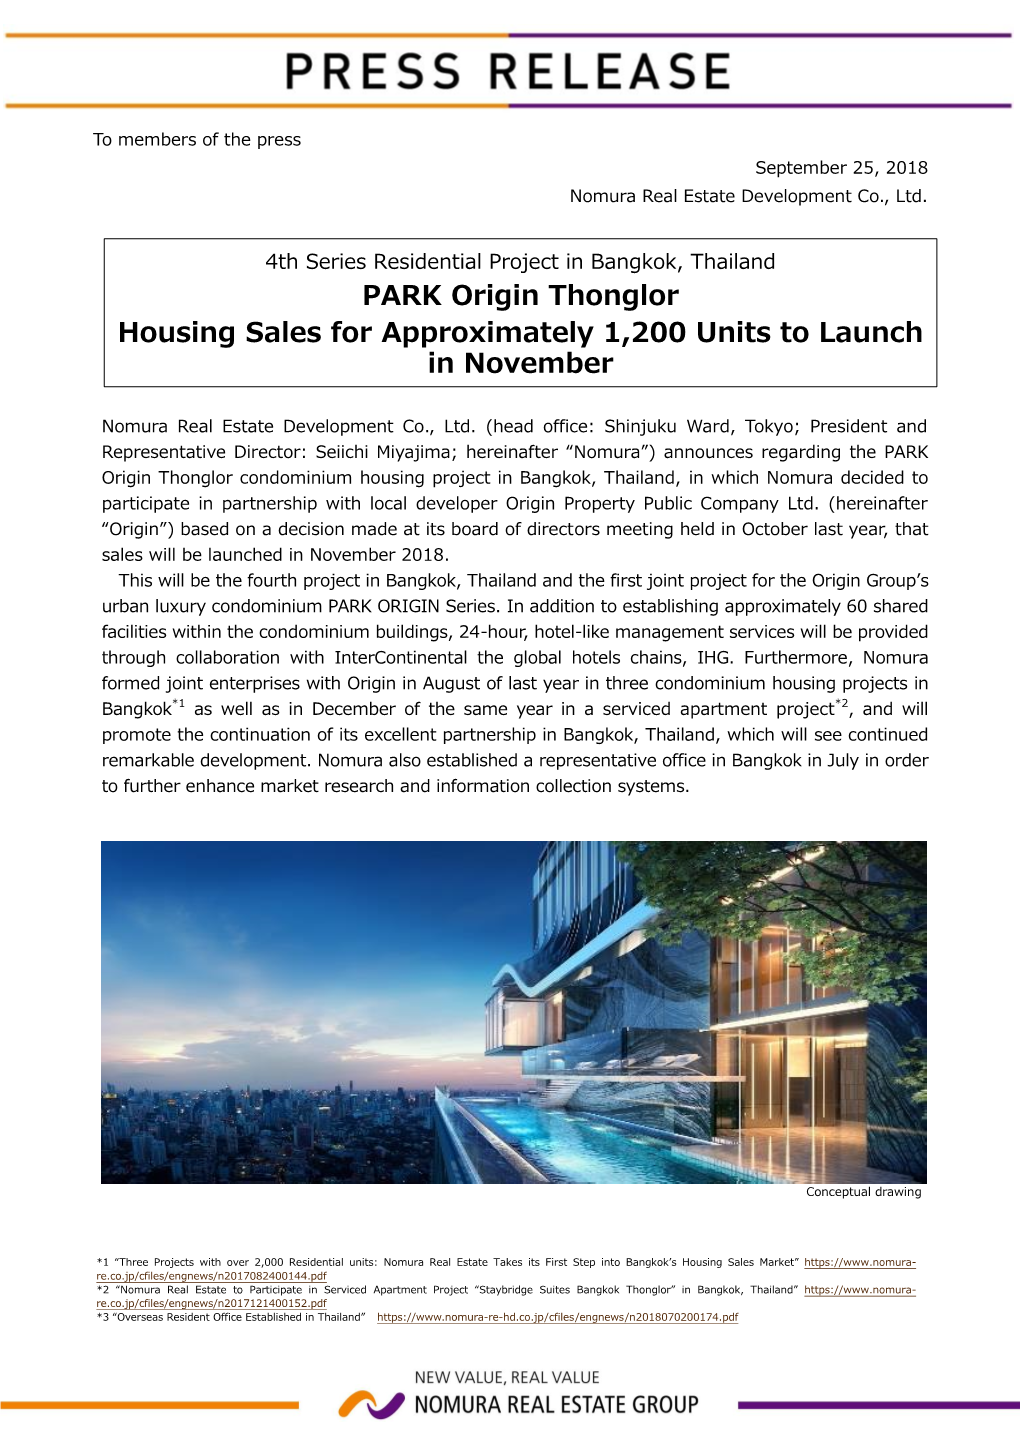 PARK Origin Thonglor Housing Sales for Approximately 1,200 Units to Launch in November